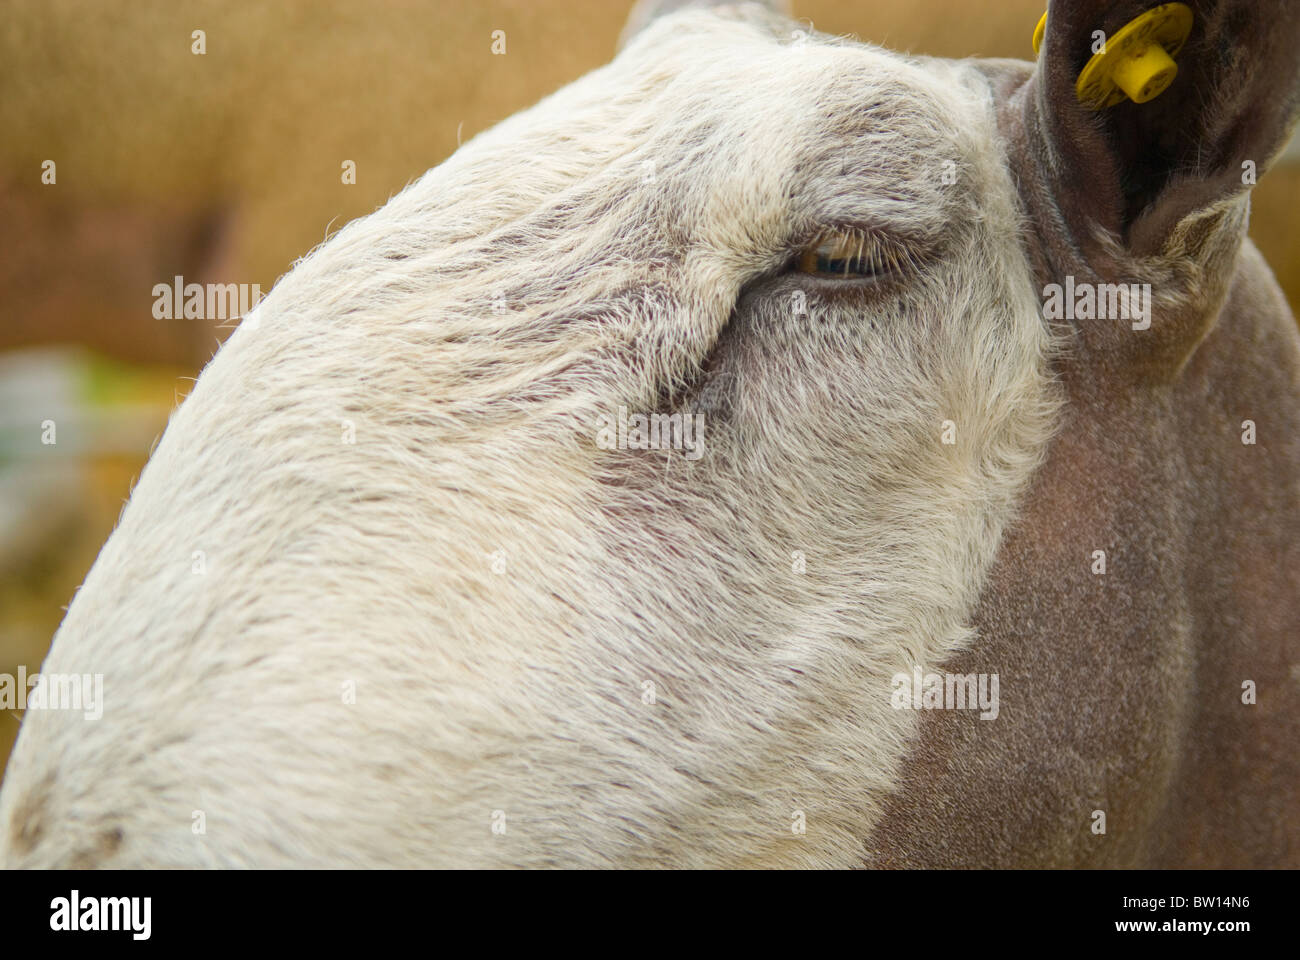 Blue Faced Leicester close up sheep (Ovis aries) Stock Photo